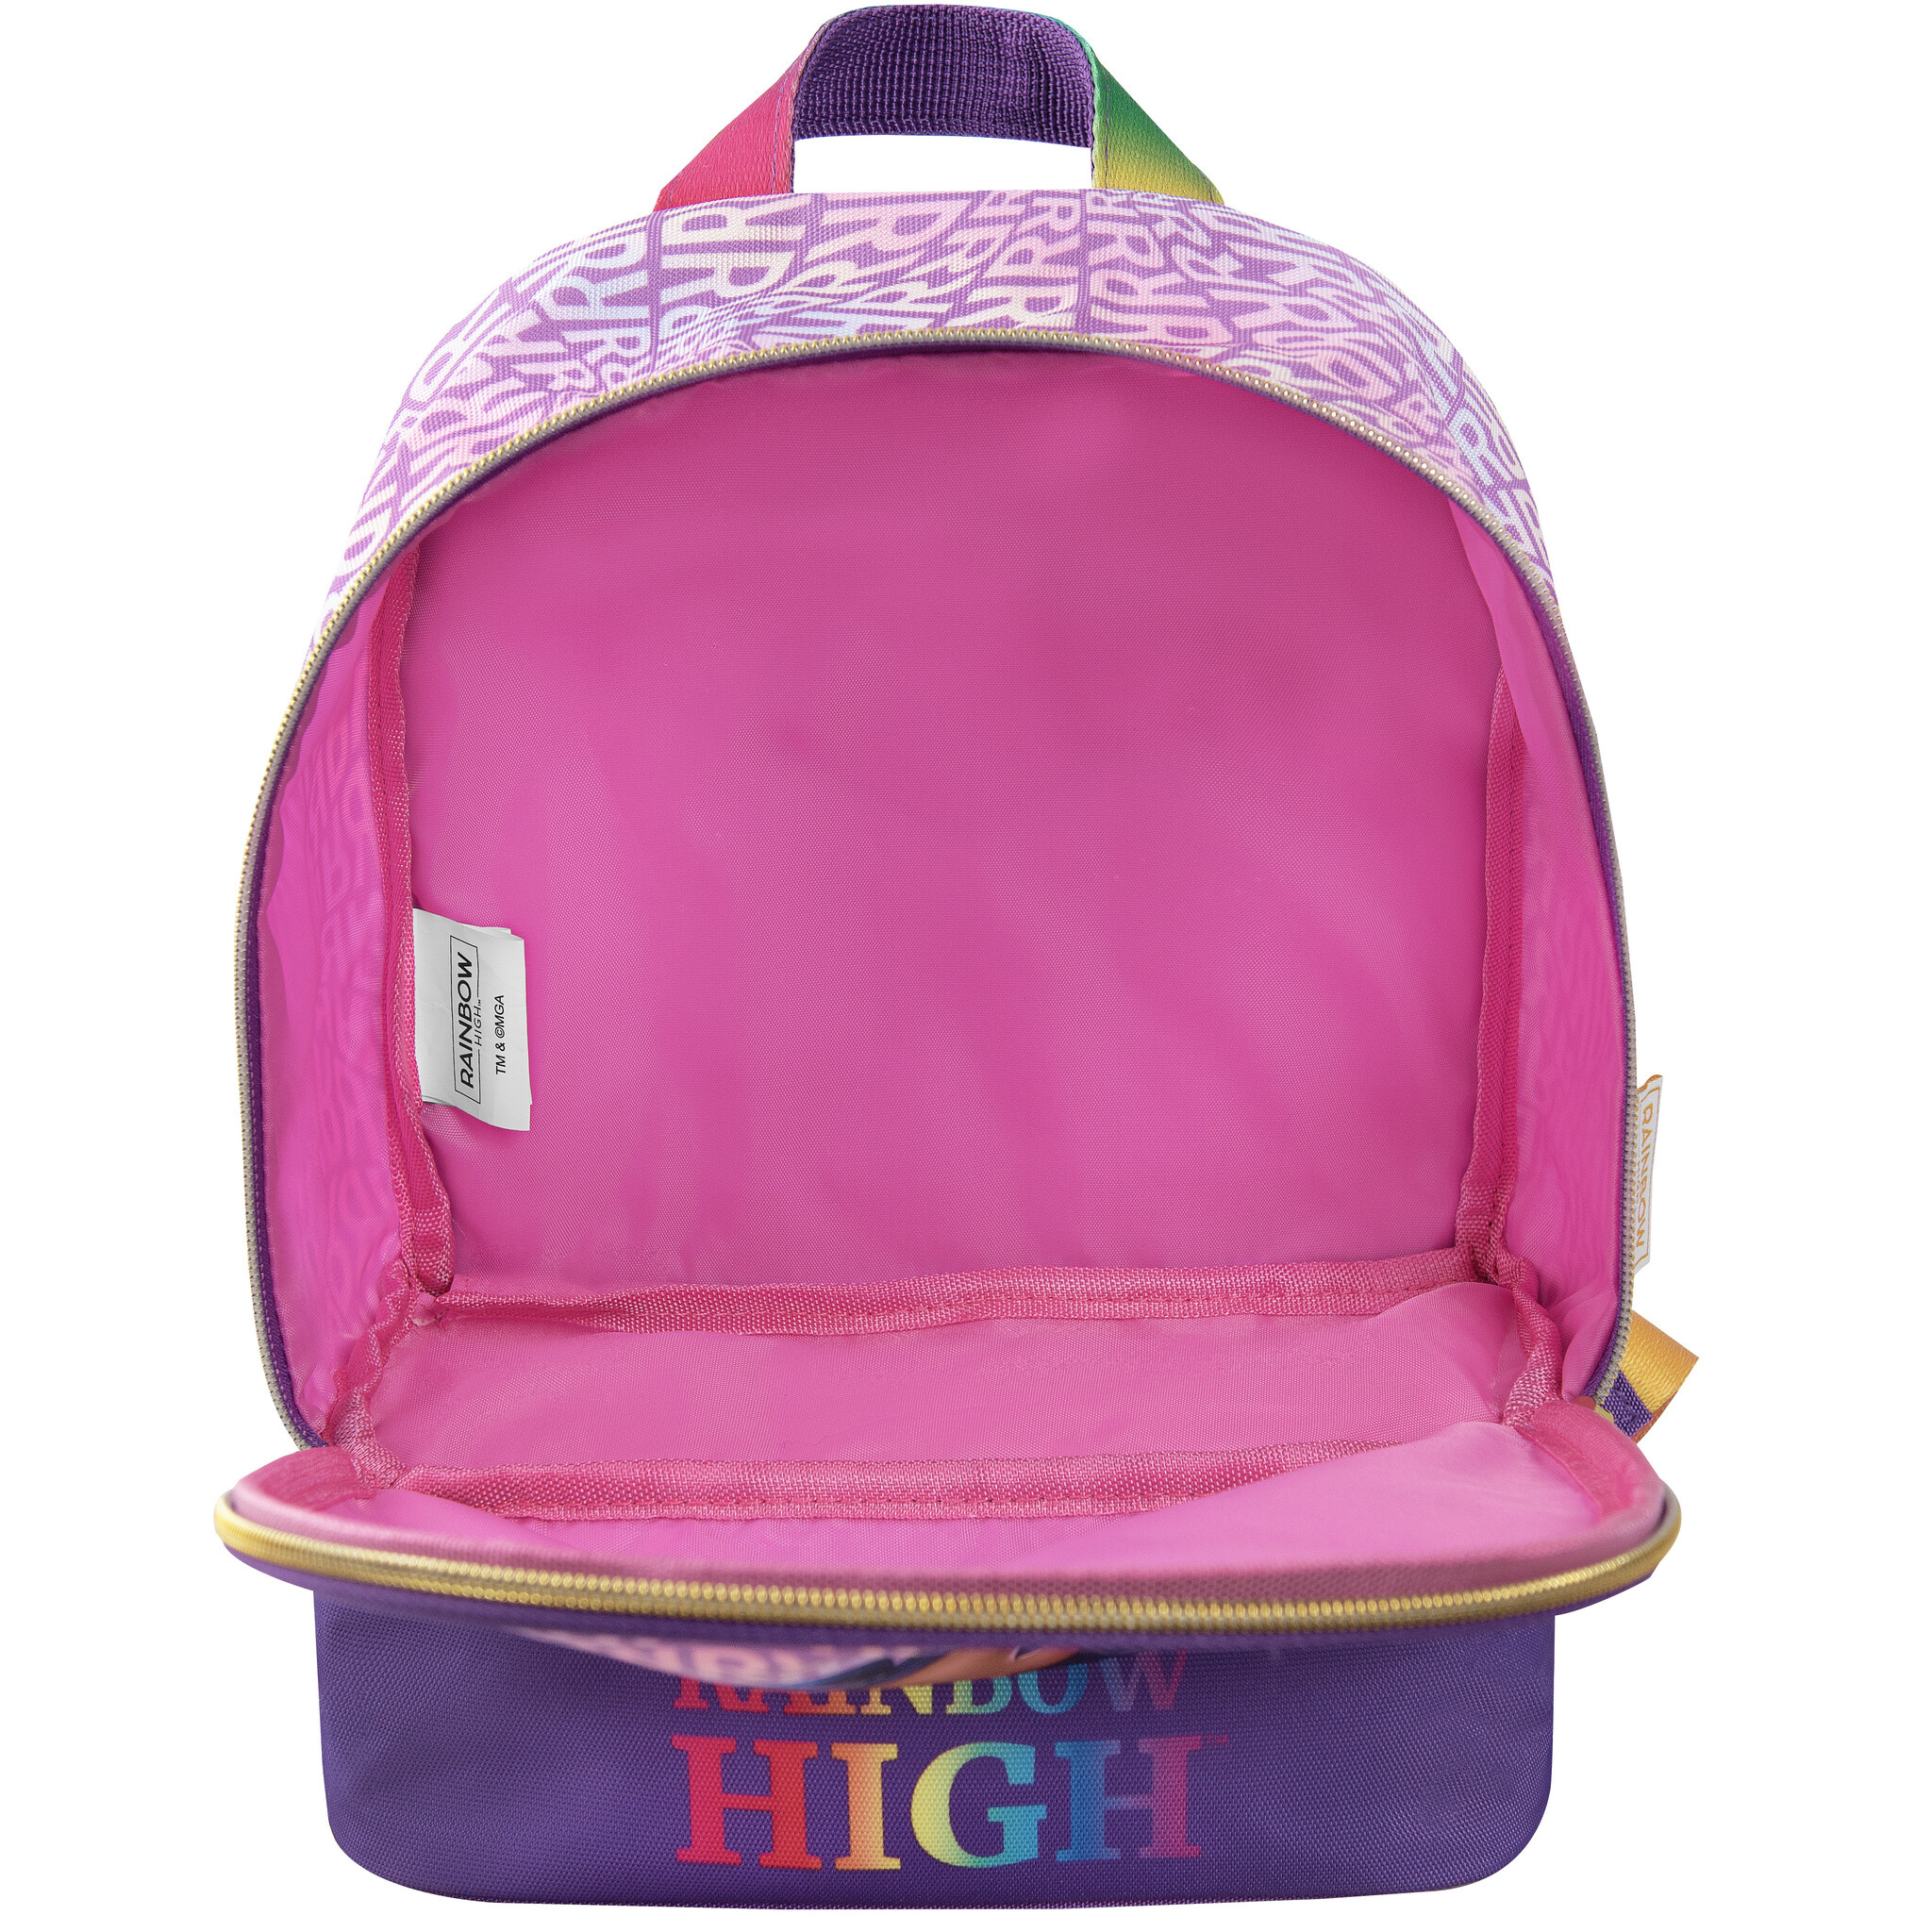 Rainbow High Toddler backpack, Shine - 30 x 23 x 10 cm - Polyester